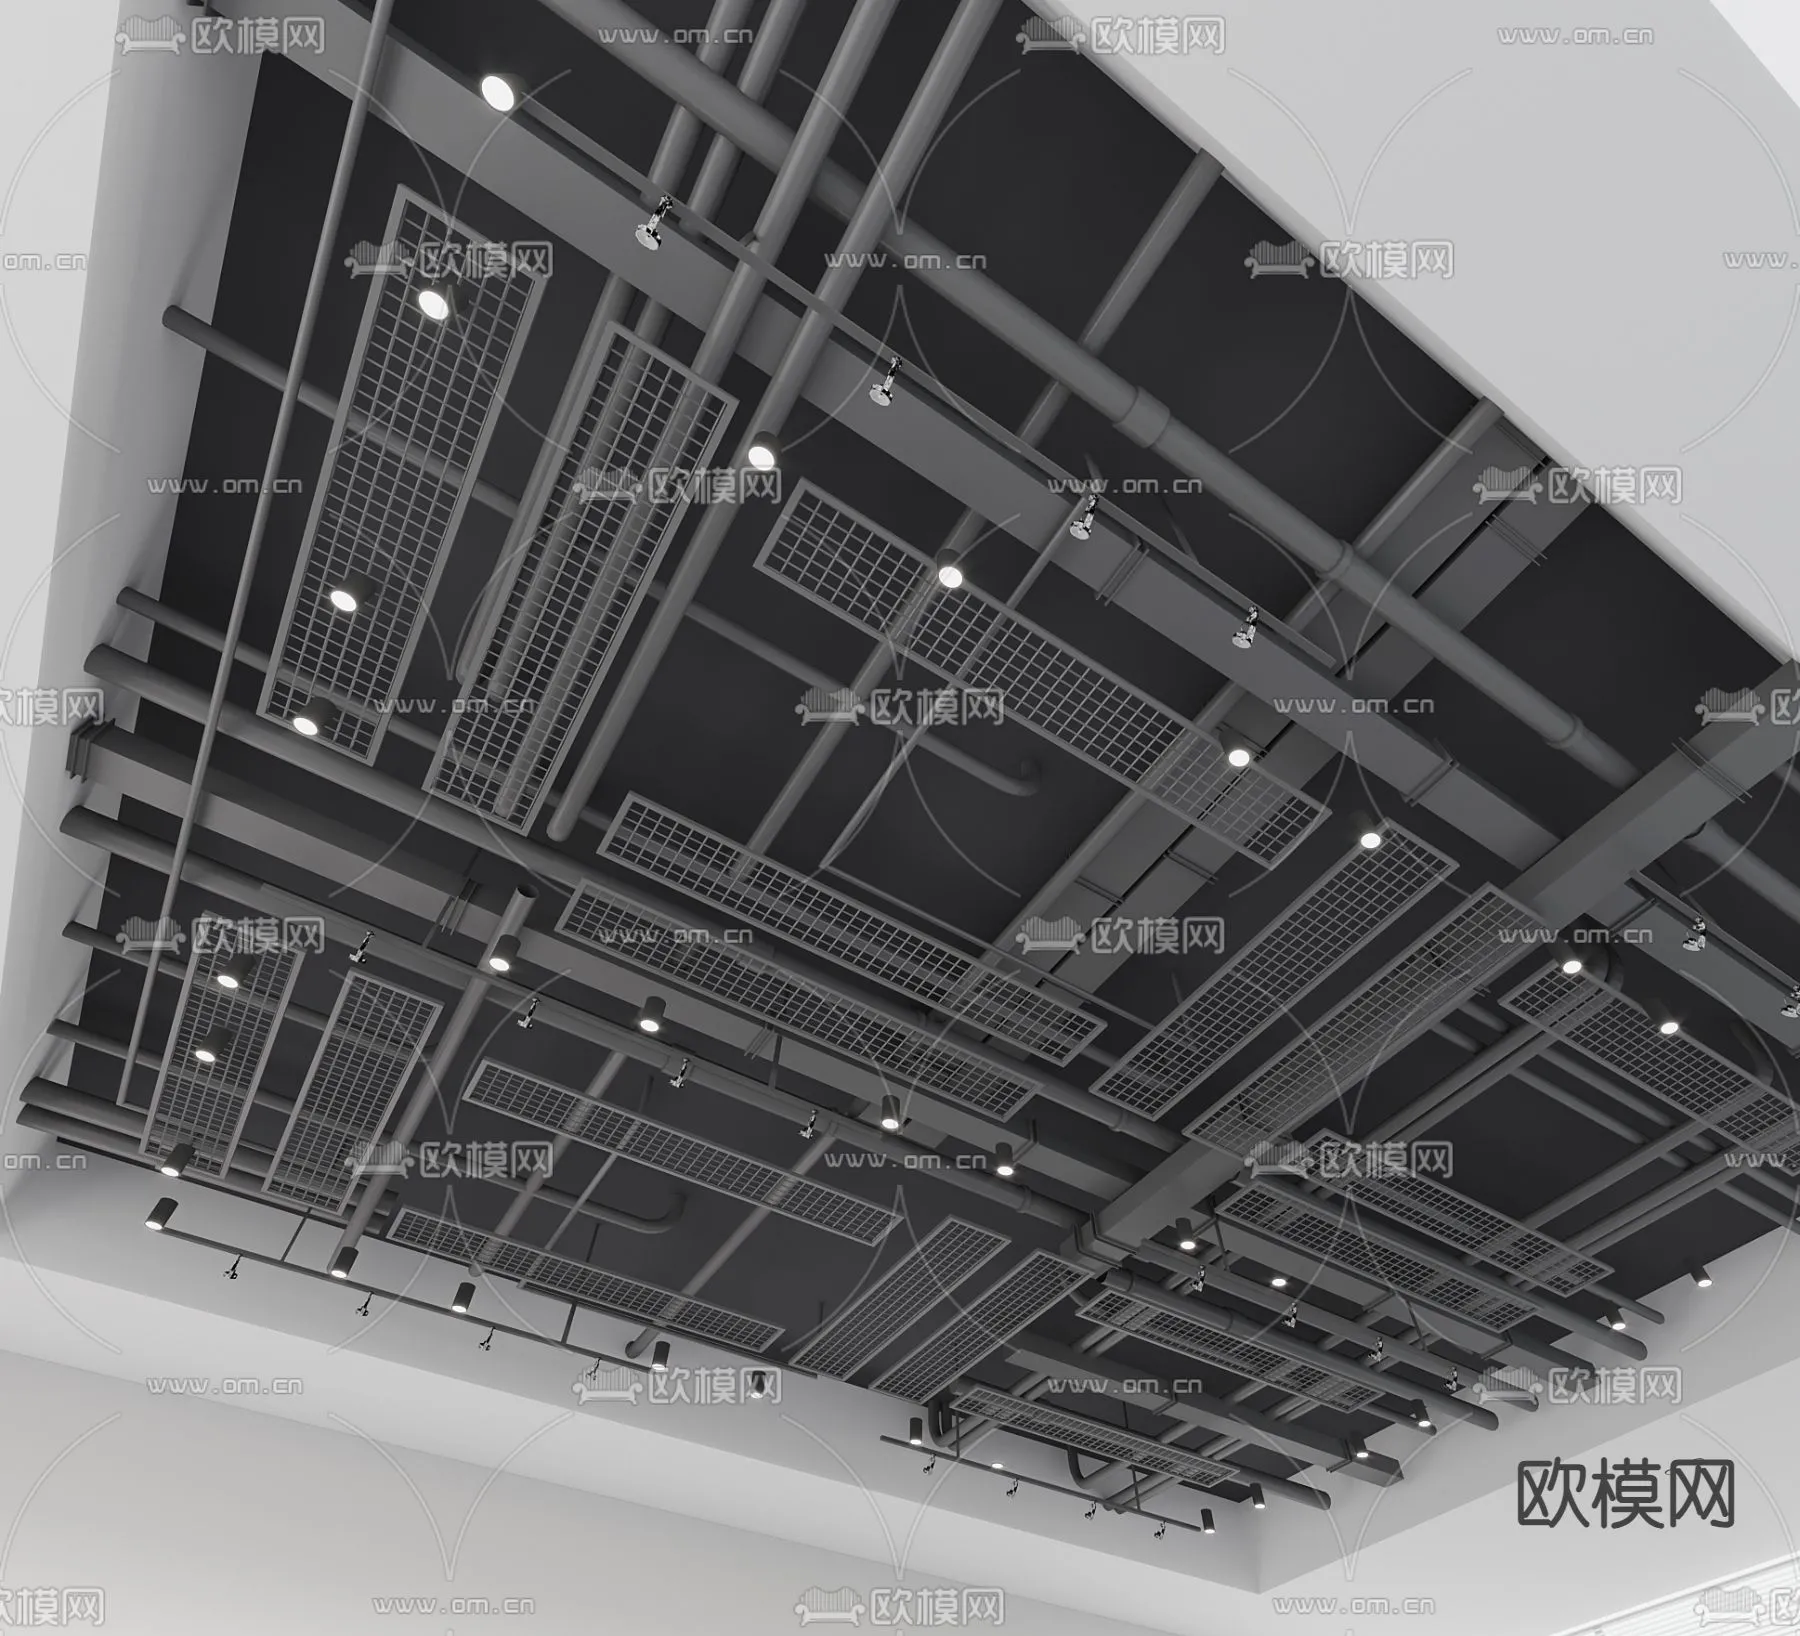 3DS MAX – DETAIL – CEILING – VRAY / CORONA – 3D MODEL – 3175